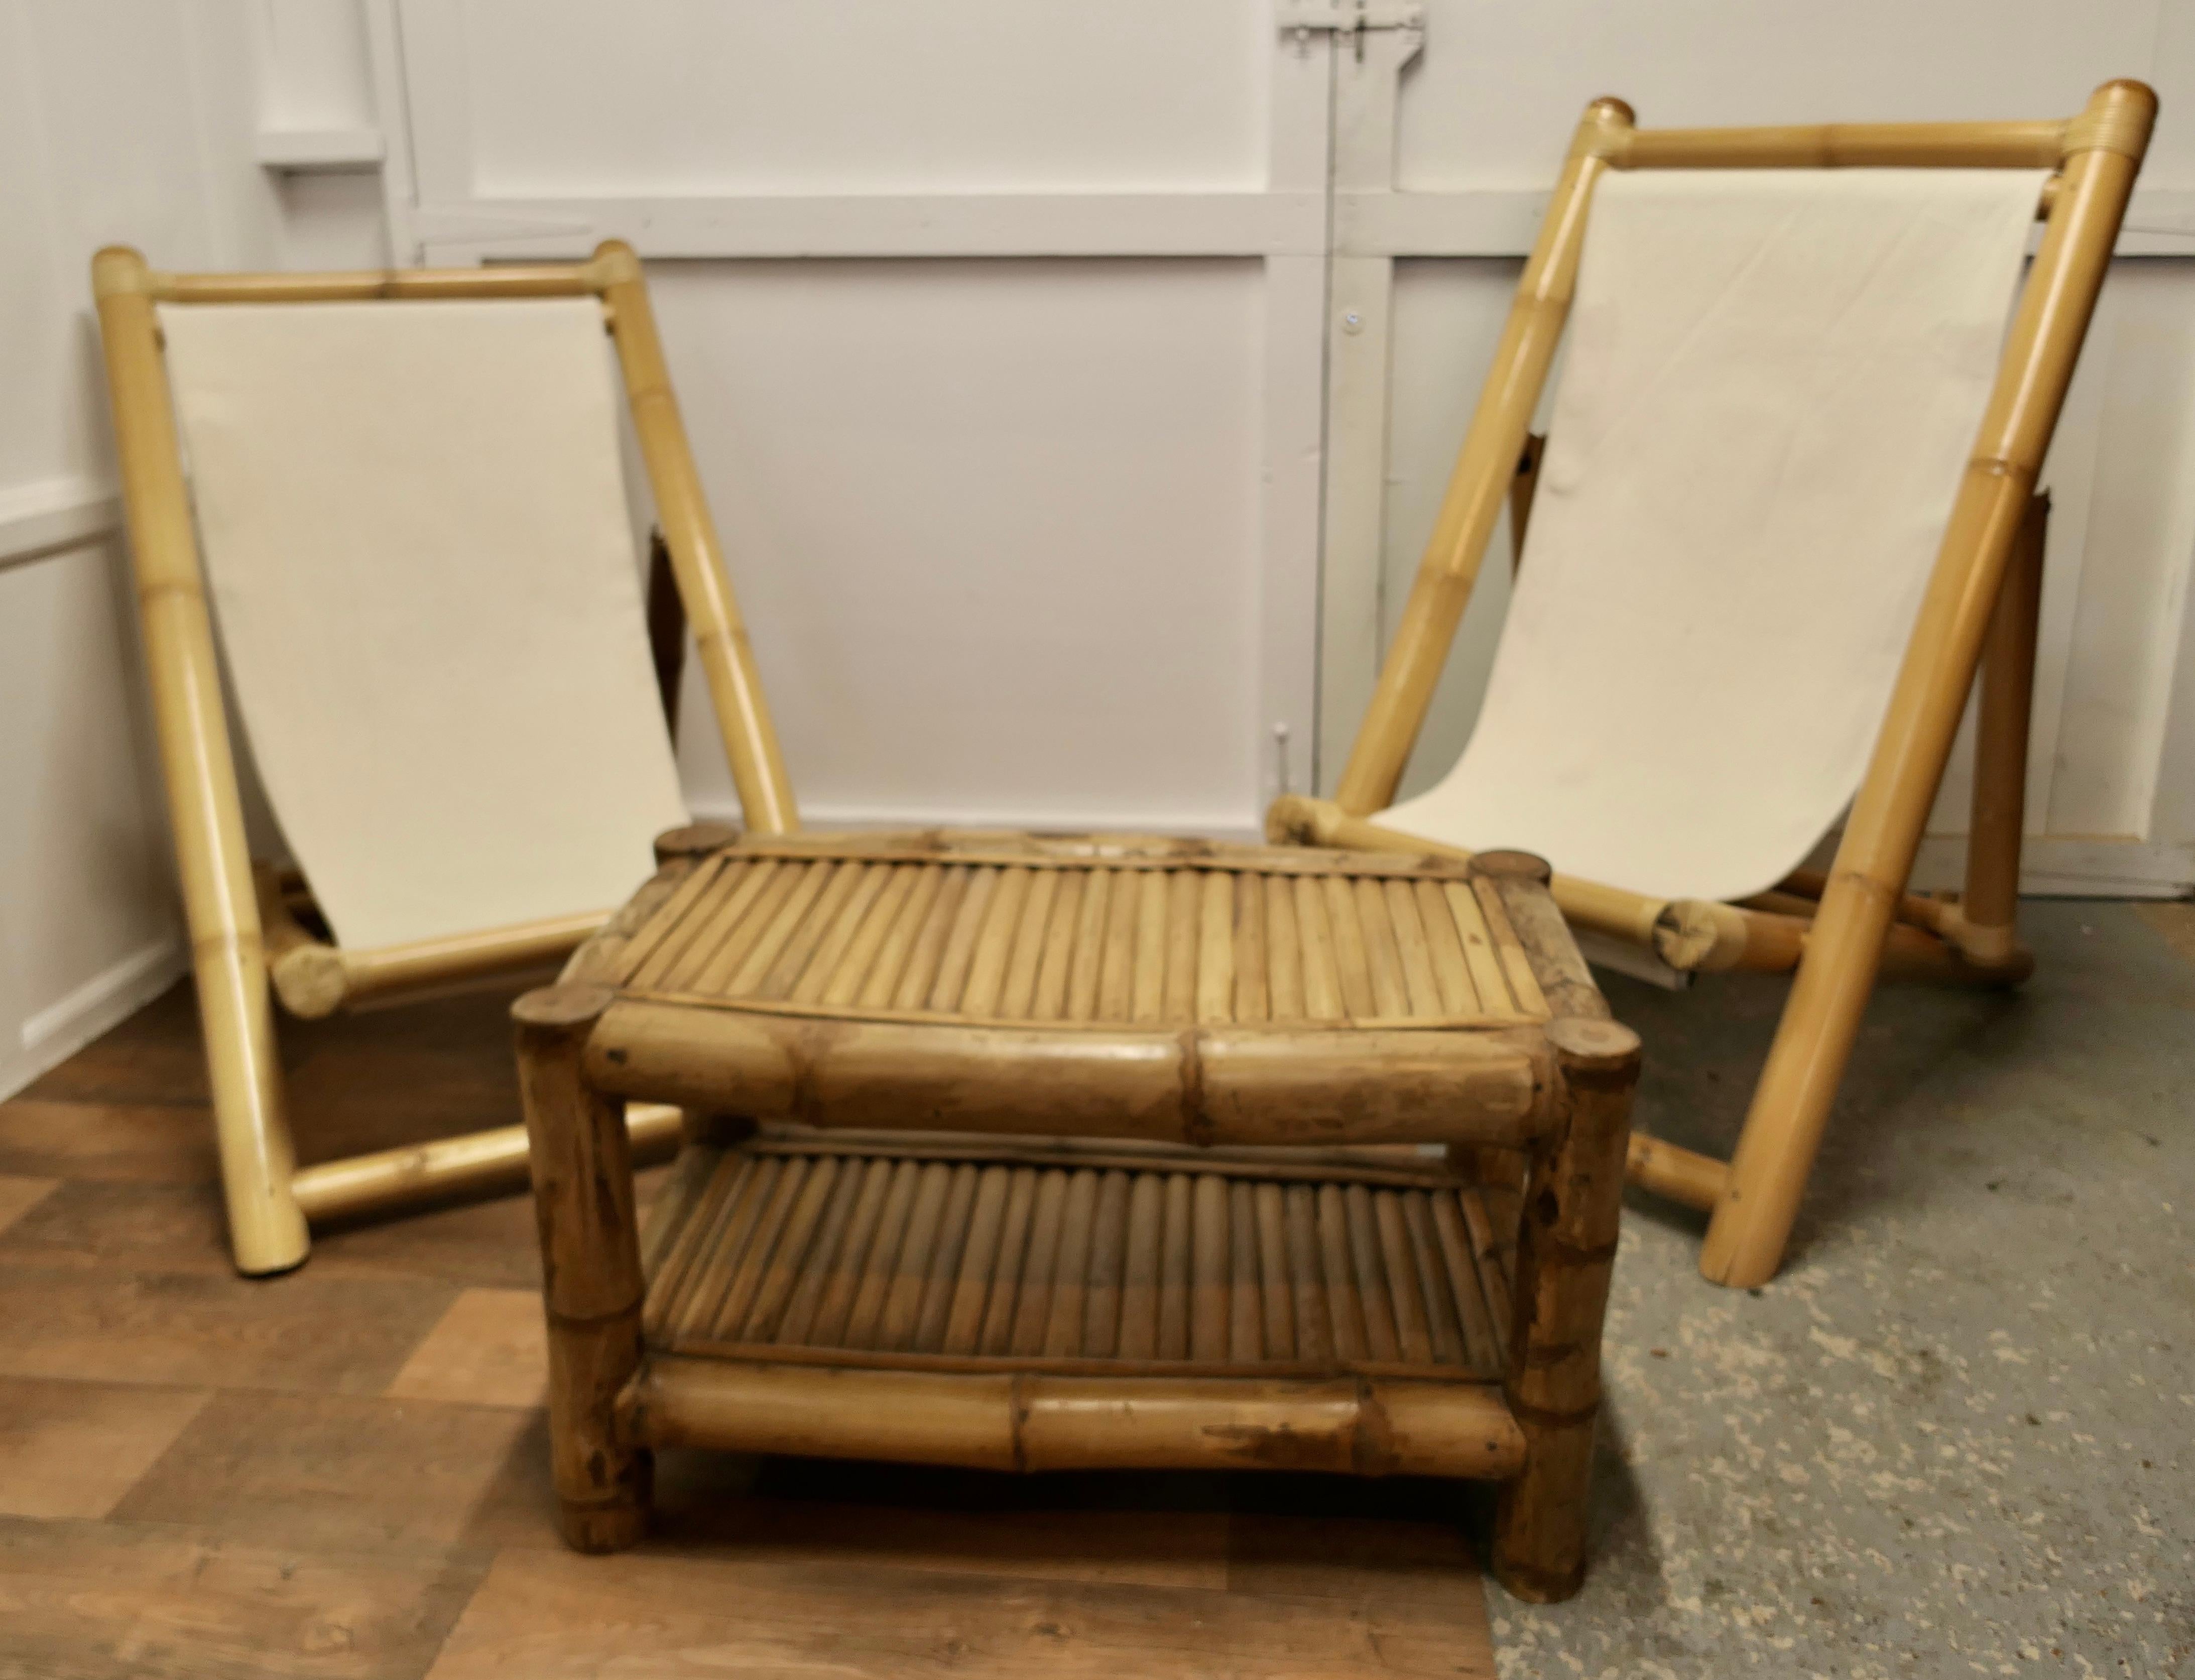 A Pair of Giant Bamboo Deck Chair Set with Coffee Table

These super folding Chairs are meds with giant bamboo and have canvas sail cloth seats, they are in very good condition, we have matched then with a giant bamboo boat shaped coffee table